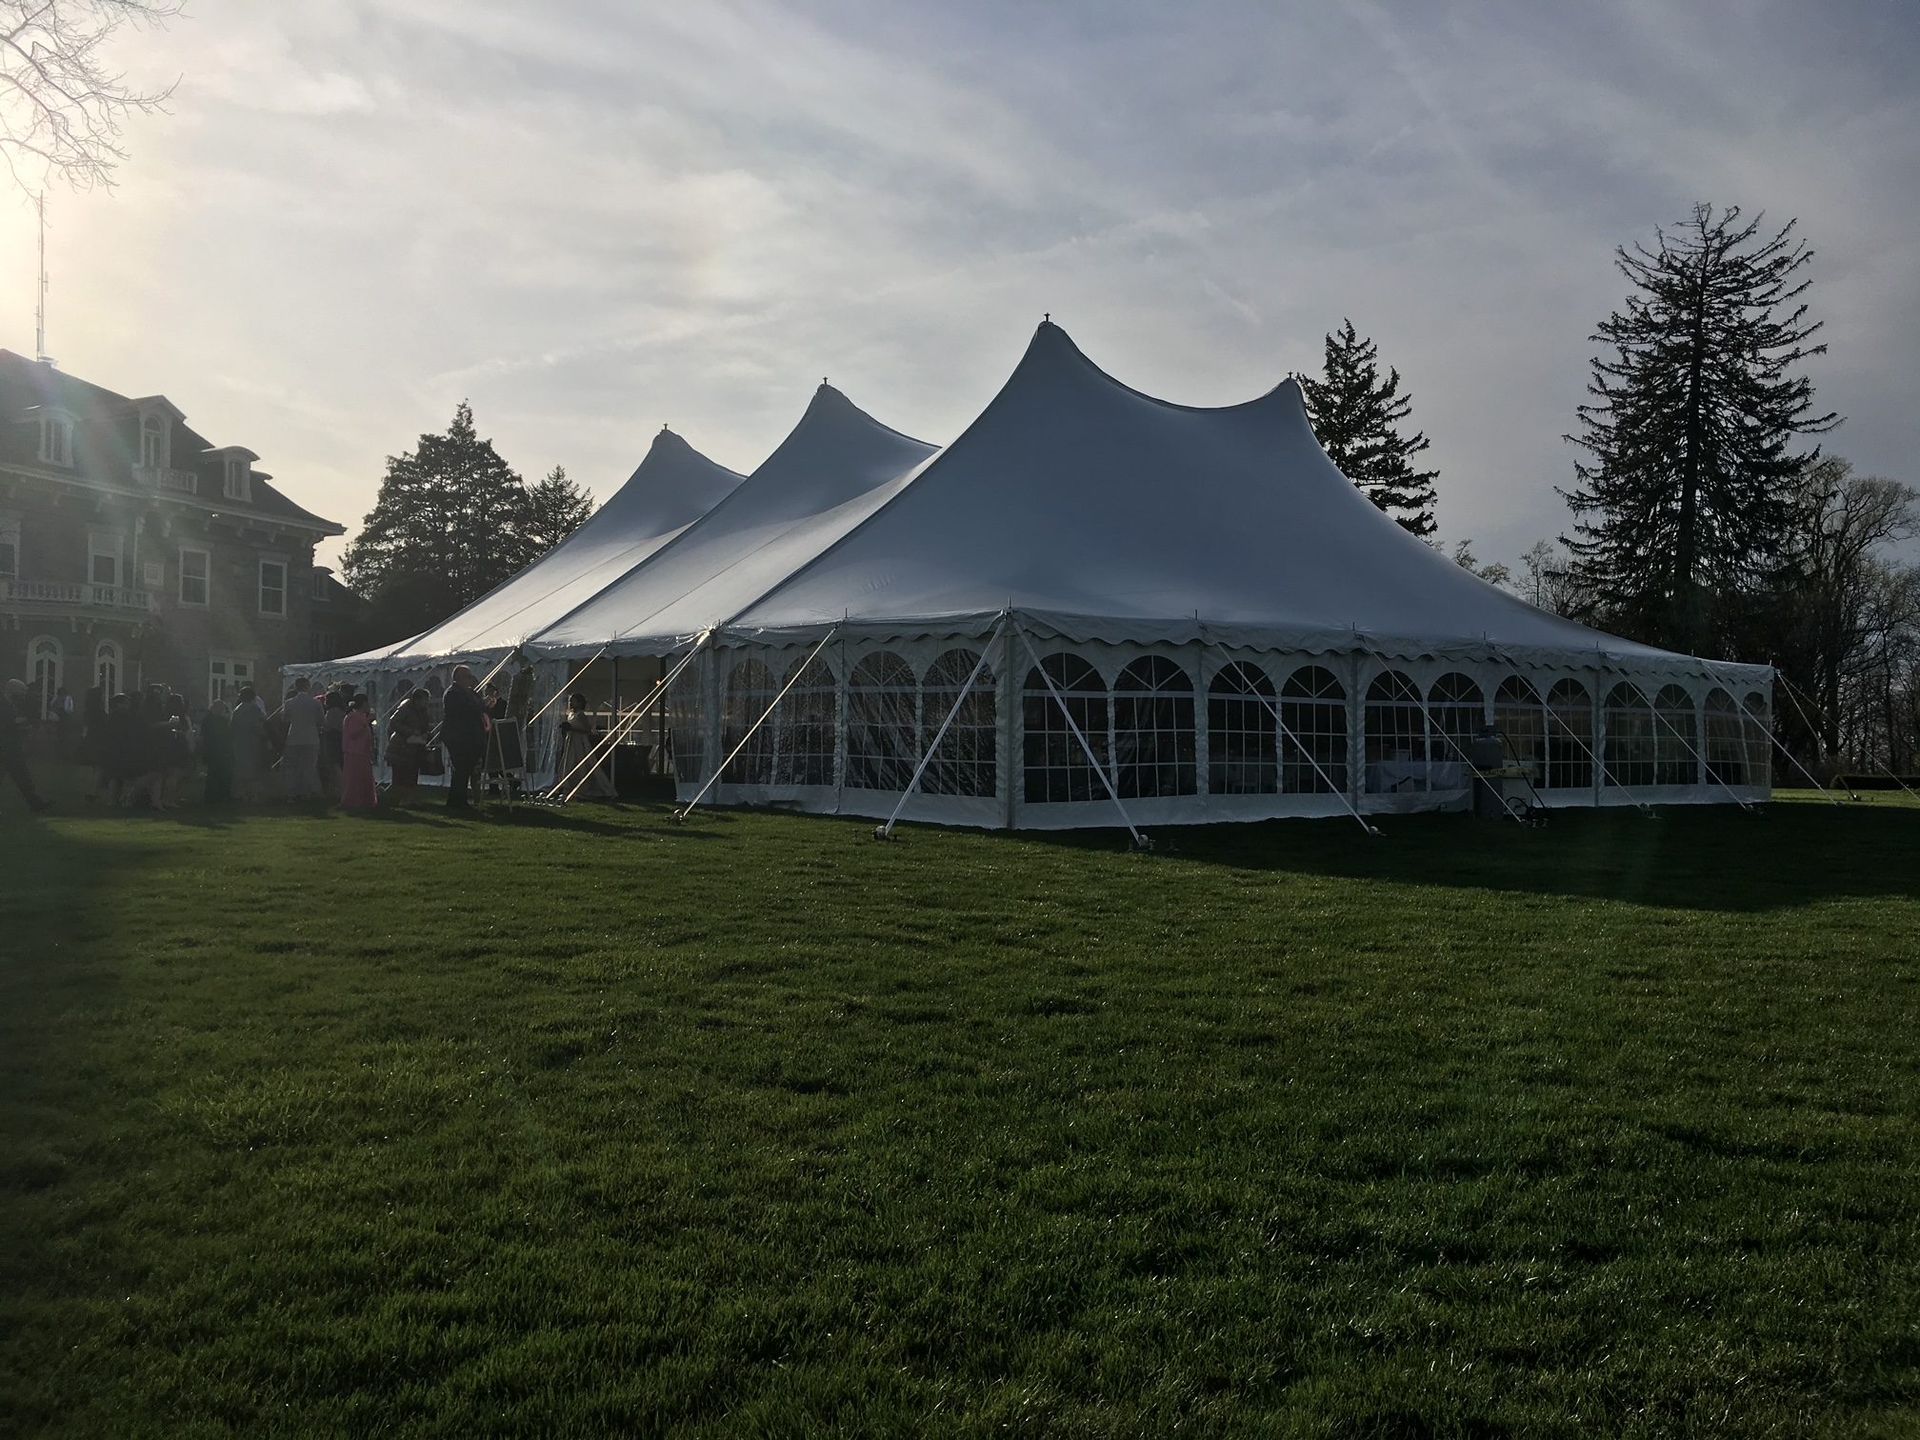 The Event Tent Rental Process: What To Know
